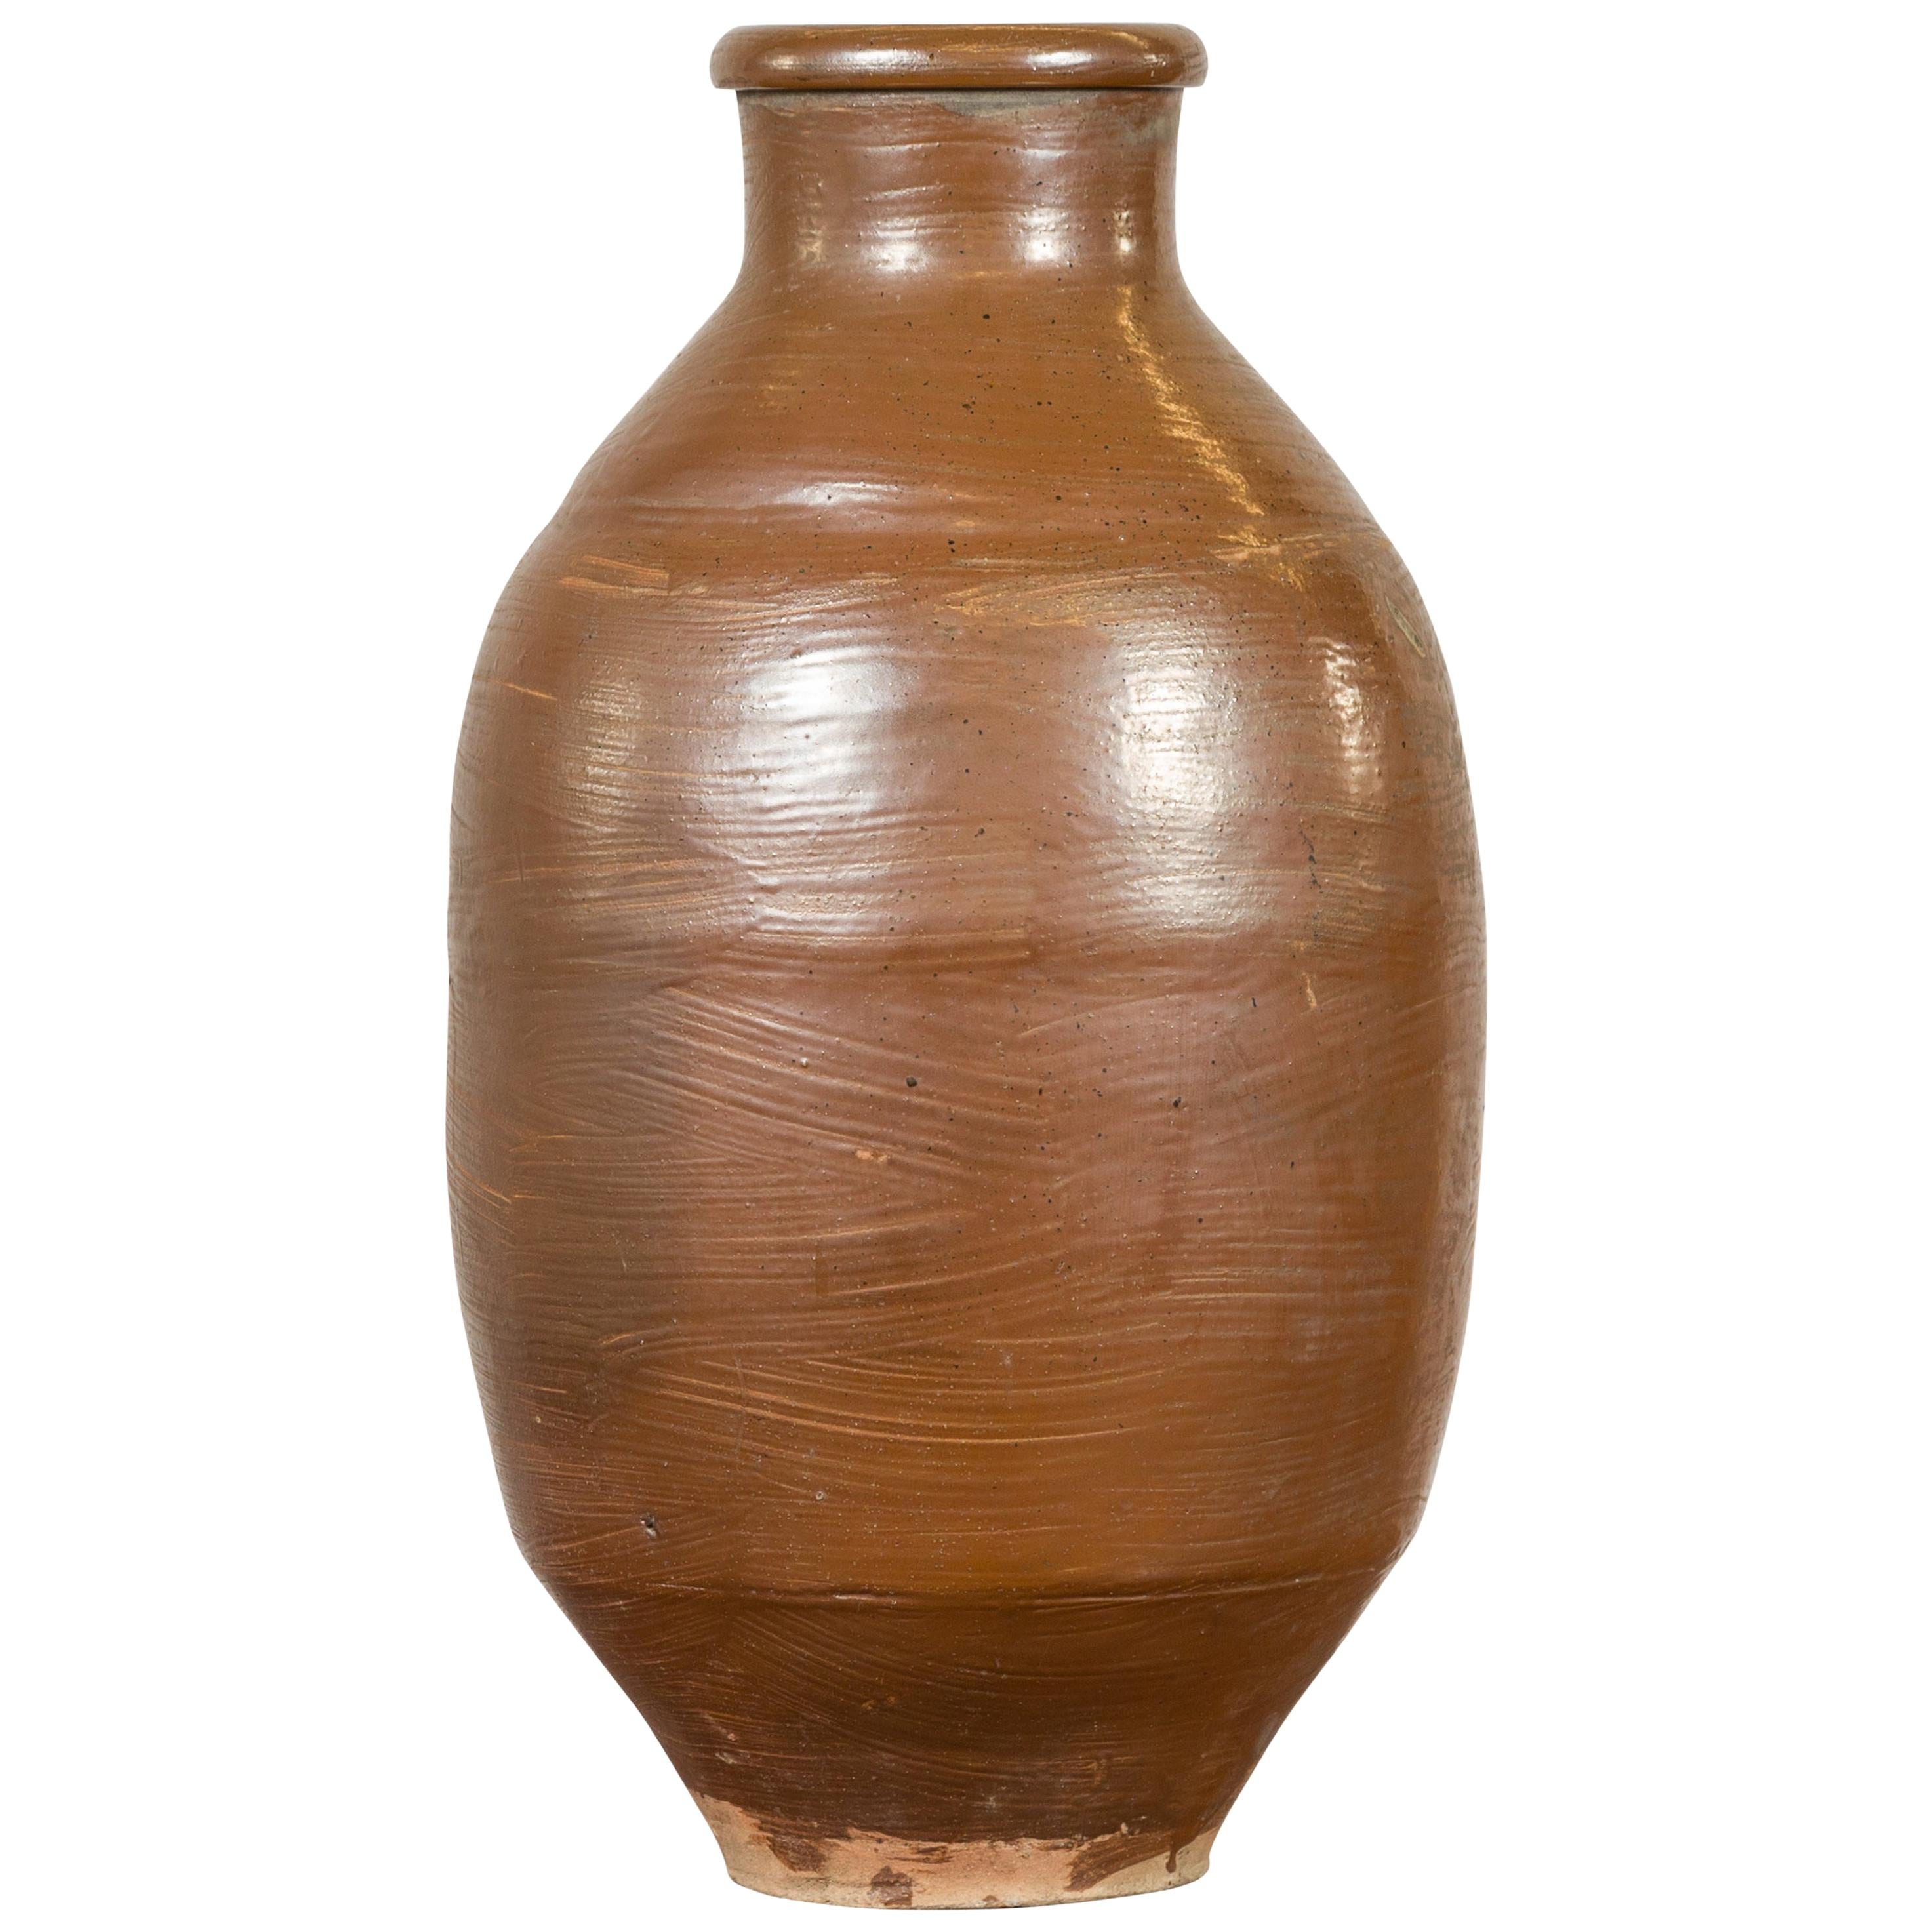 Japanese Meiji Period 19th century Water Jar with Brown Monochrome Patina For Sale